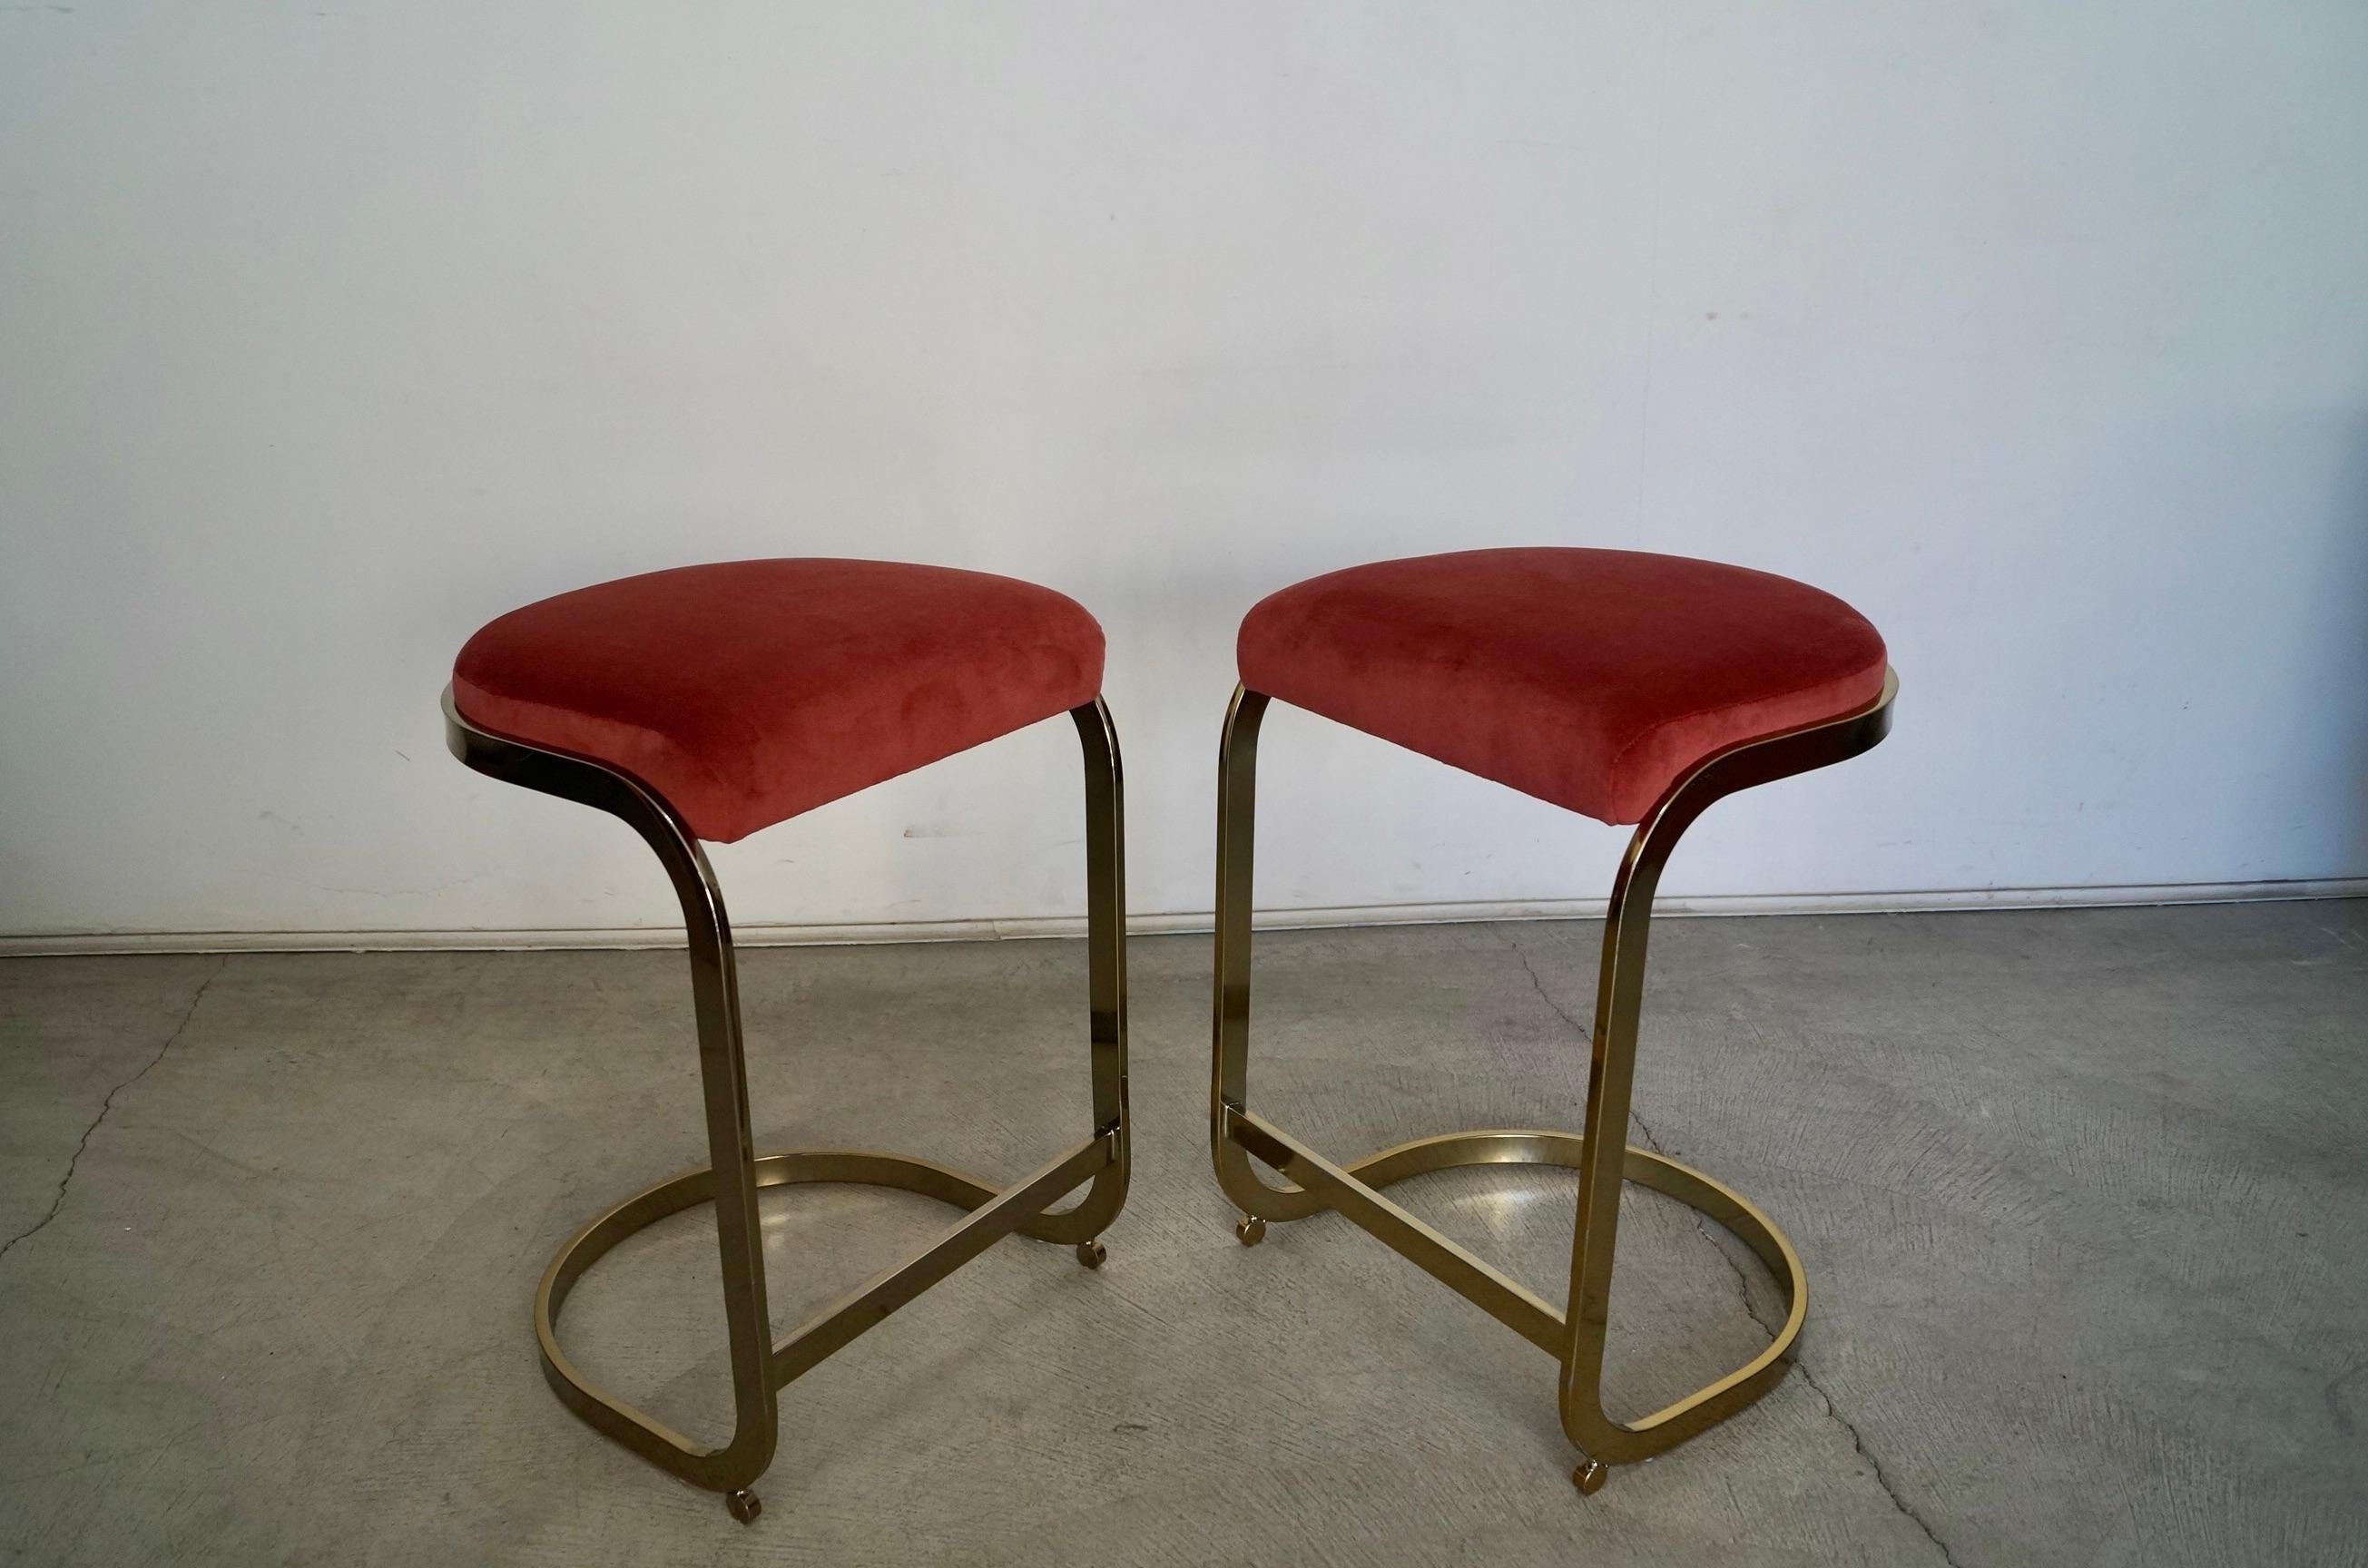 1970s Hollywood Regency Brass Counter Stools, a Pair For Sale 5